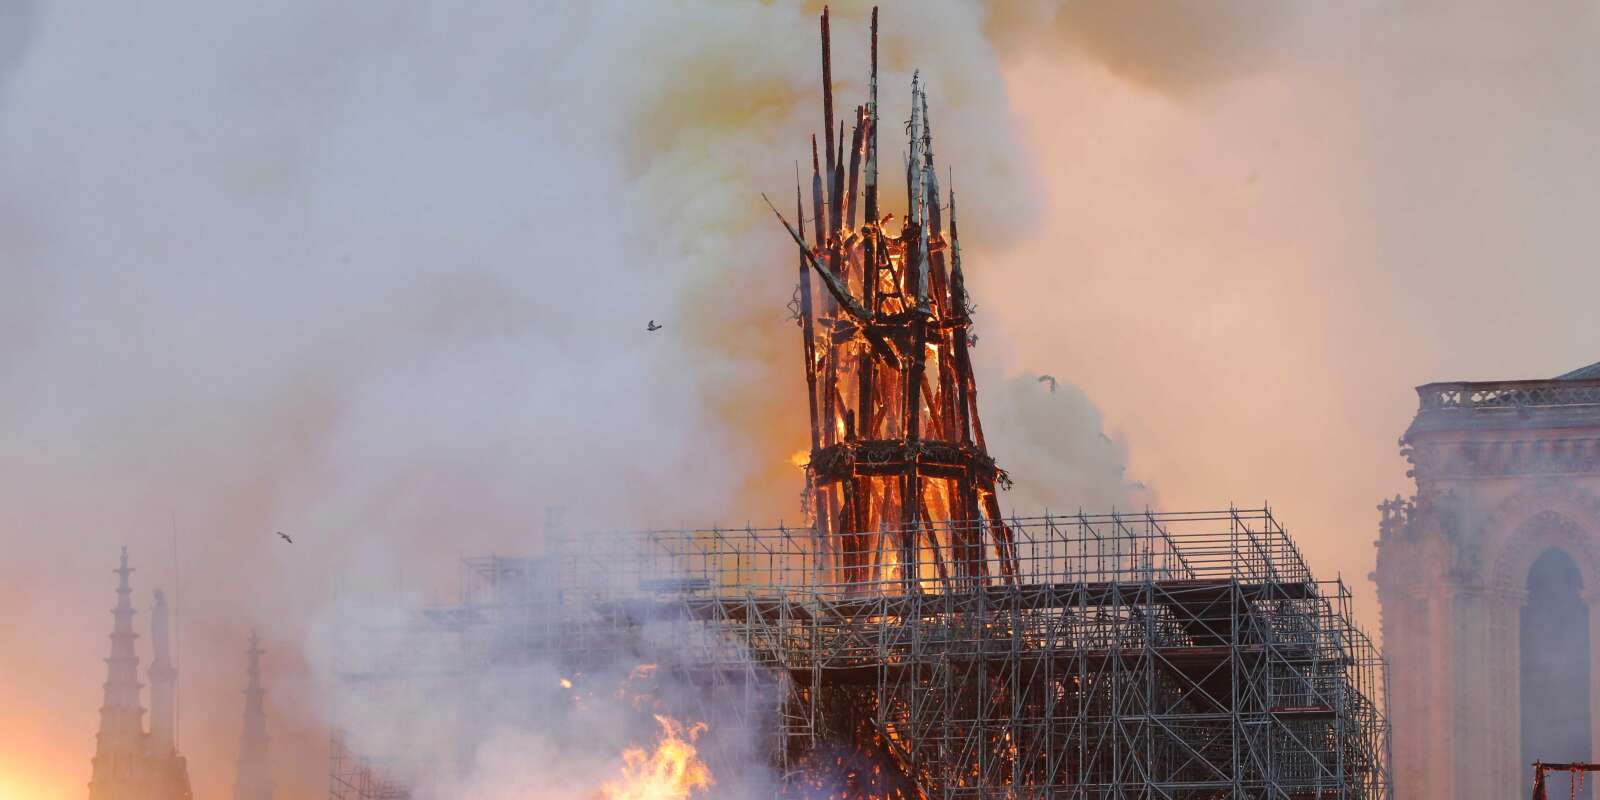 Smoke and flames rise during a fire at the landmark Notre-Dame Cathedral in central Paris on April 15, 2019, potentially involving renovation works being carried out at the site, the fire service said. A major fire broke out at the landmark Notre-Dame Cathedral in central Paris sending flames and huge clouds of grey smoke billowing into the sky, the fire service said. The flames and smoke plumed from the spire and roof of the gothic cathedral, visited by millions of people a year, where renovations are currently underway. / AFP / FRANCOIS GUILLOT